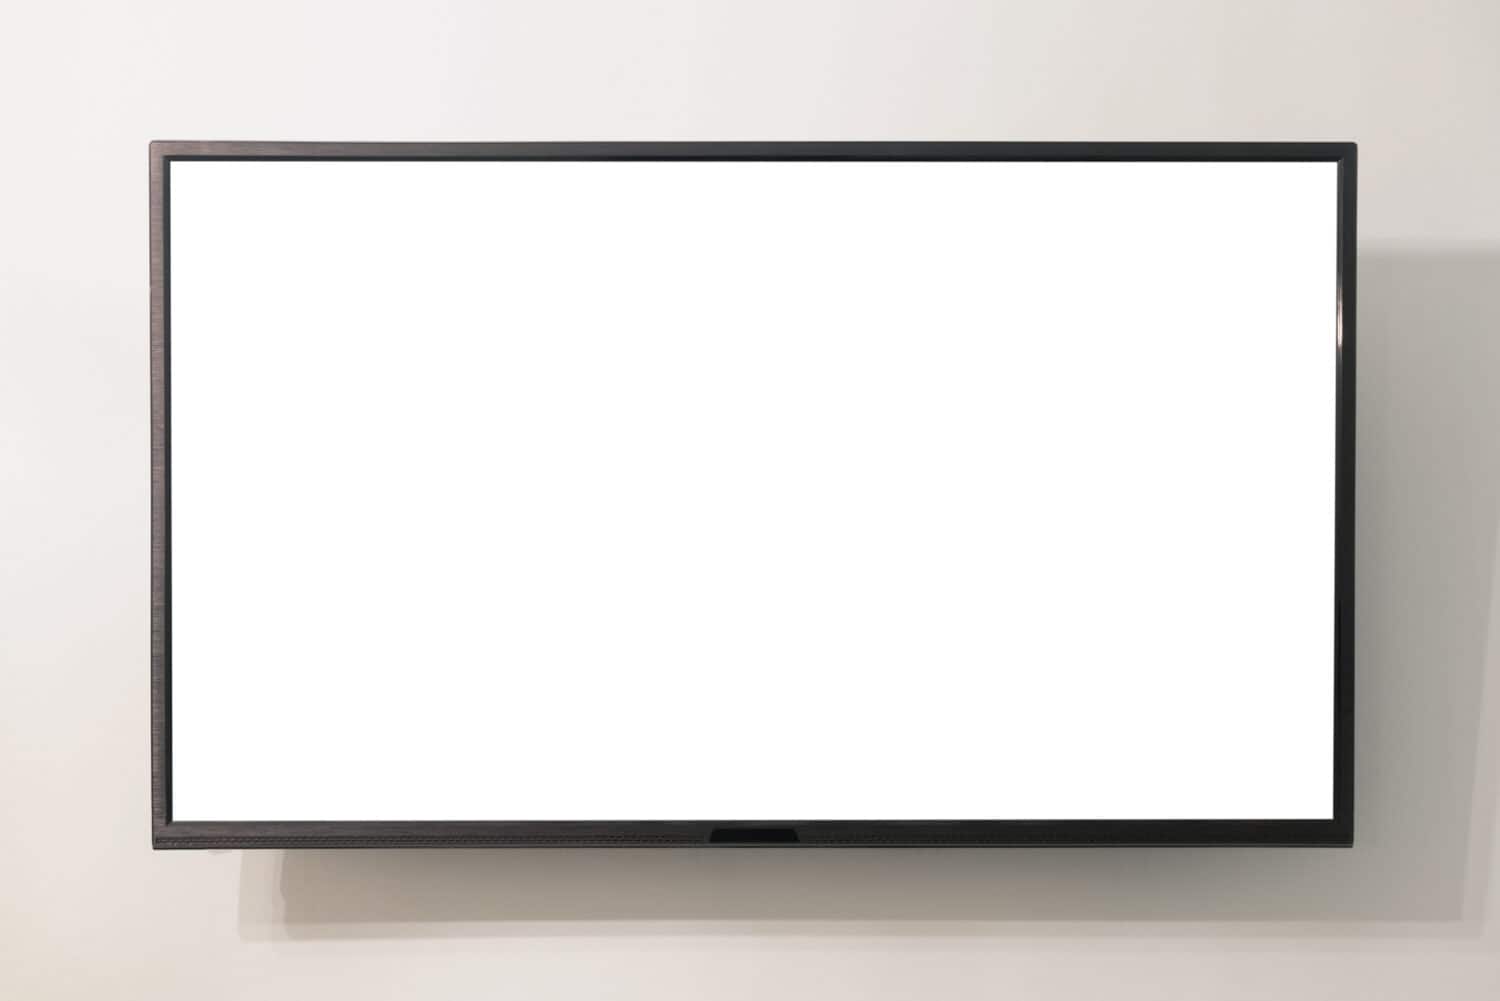 Modern widescreen TV set with blank screen hanging on the wall. Frame tv